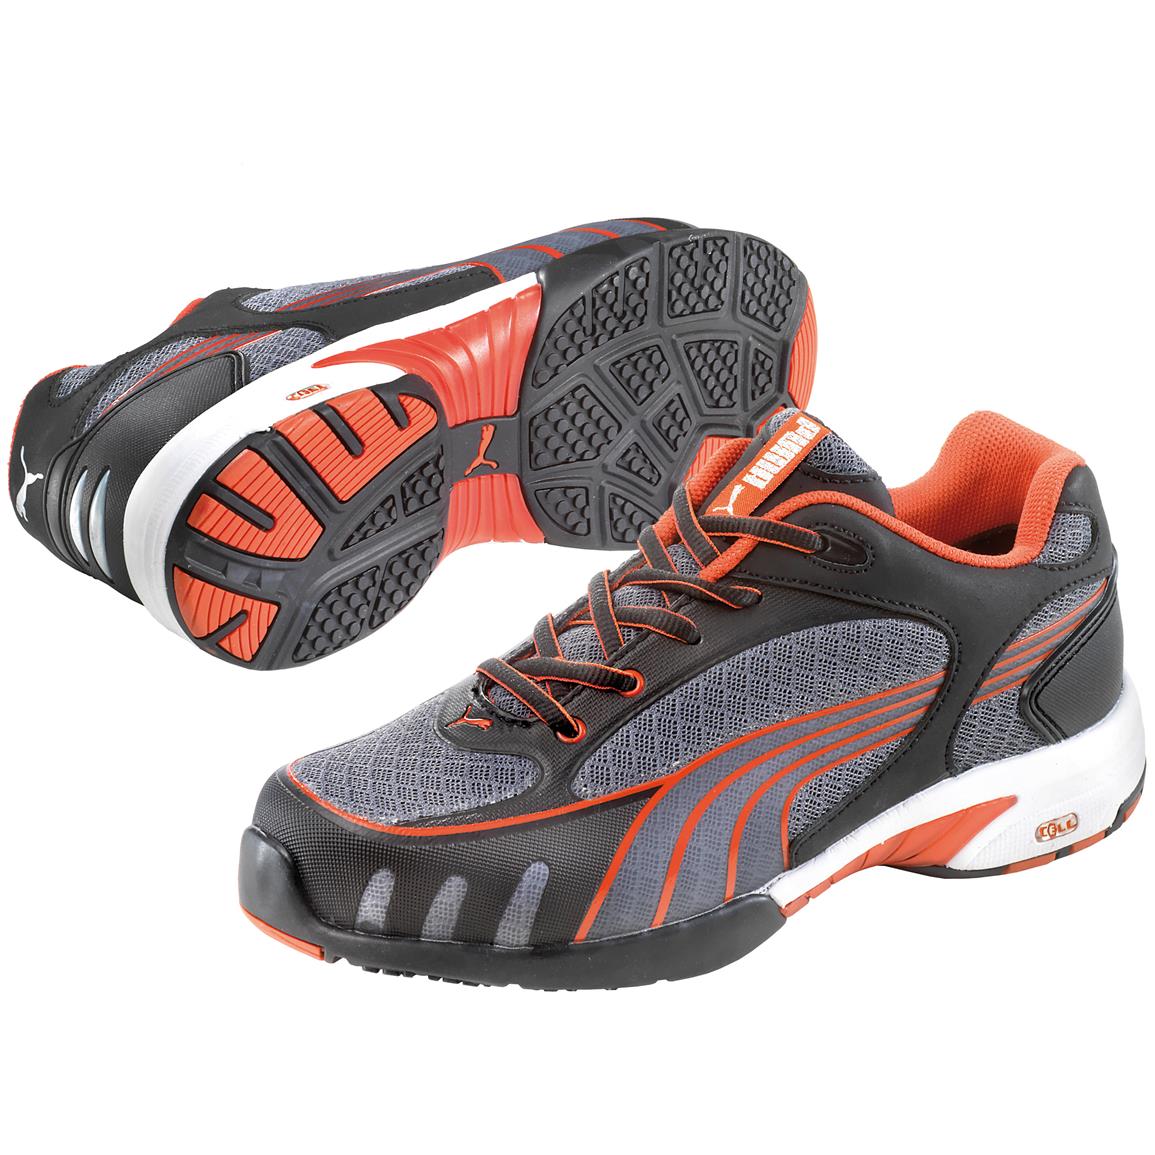 Women's Puma Safety Fuse Motion SD Low Steel Toe Shoes